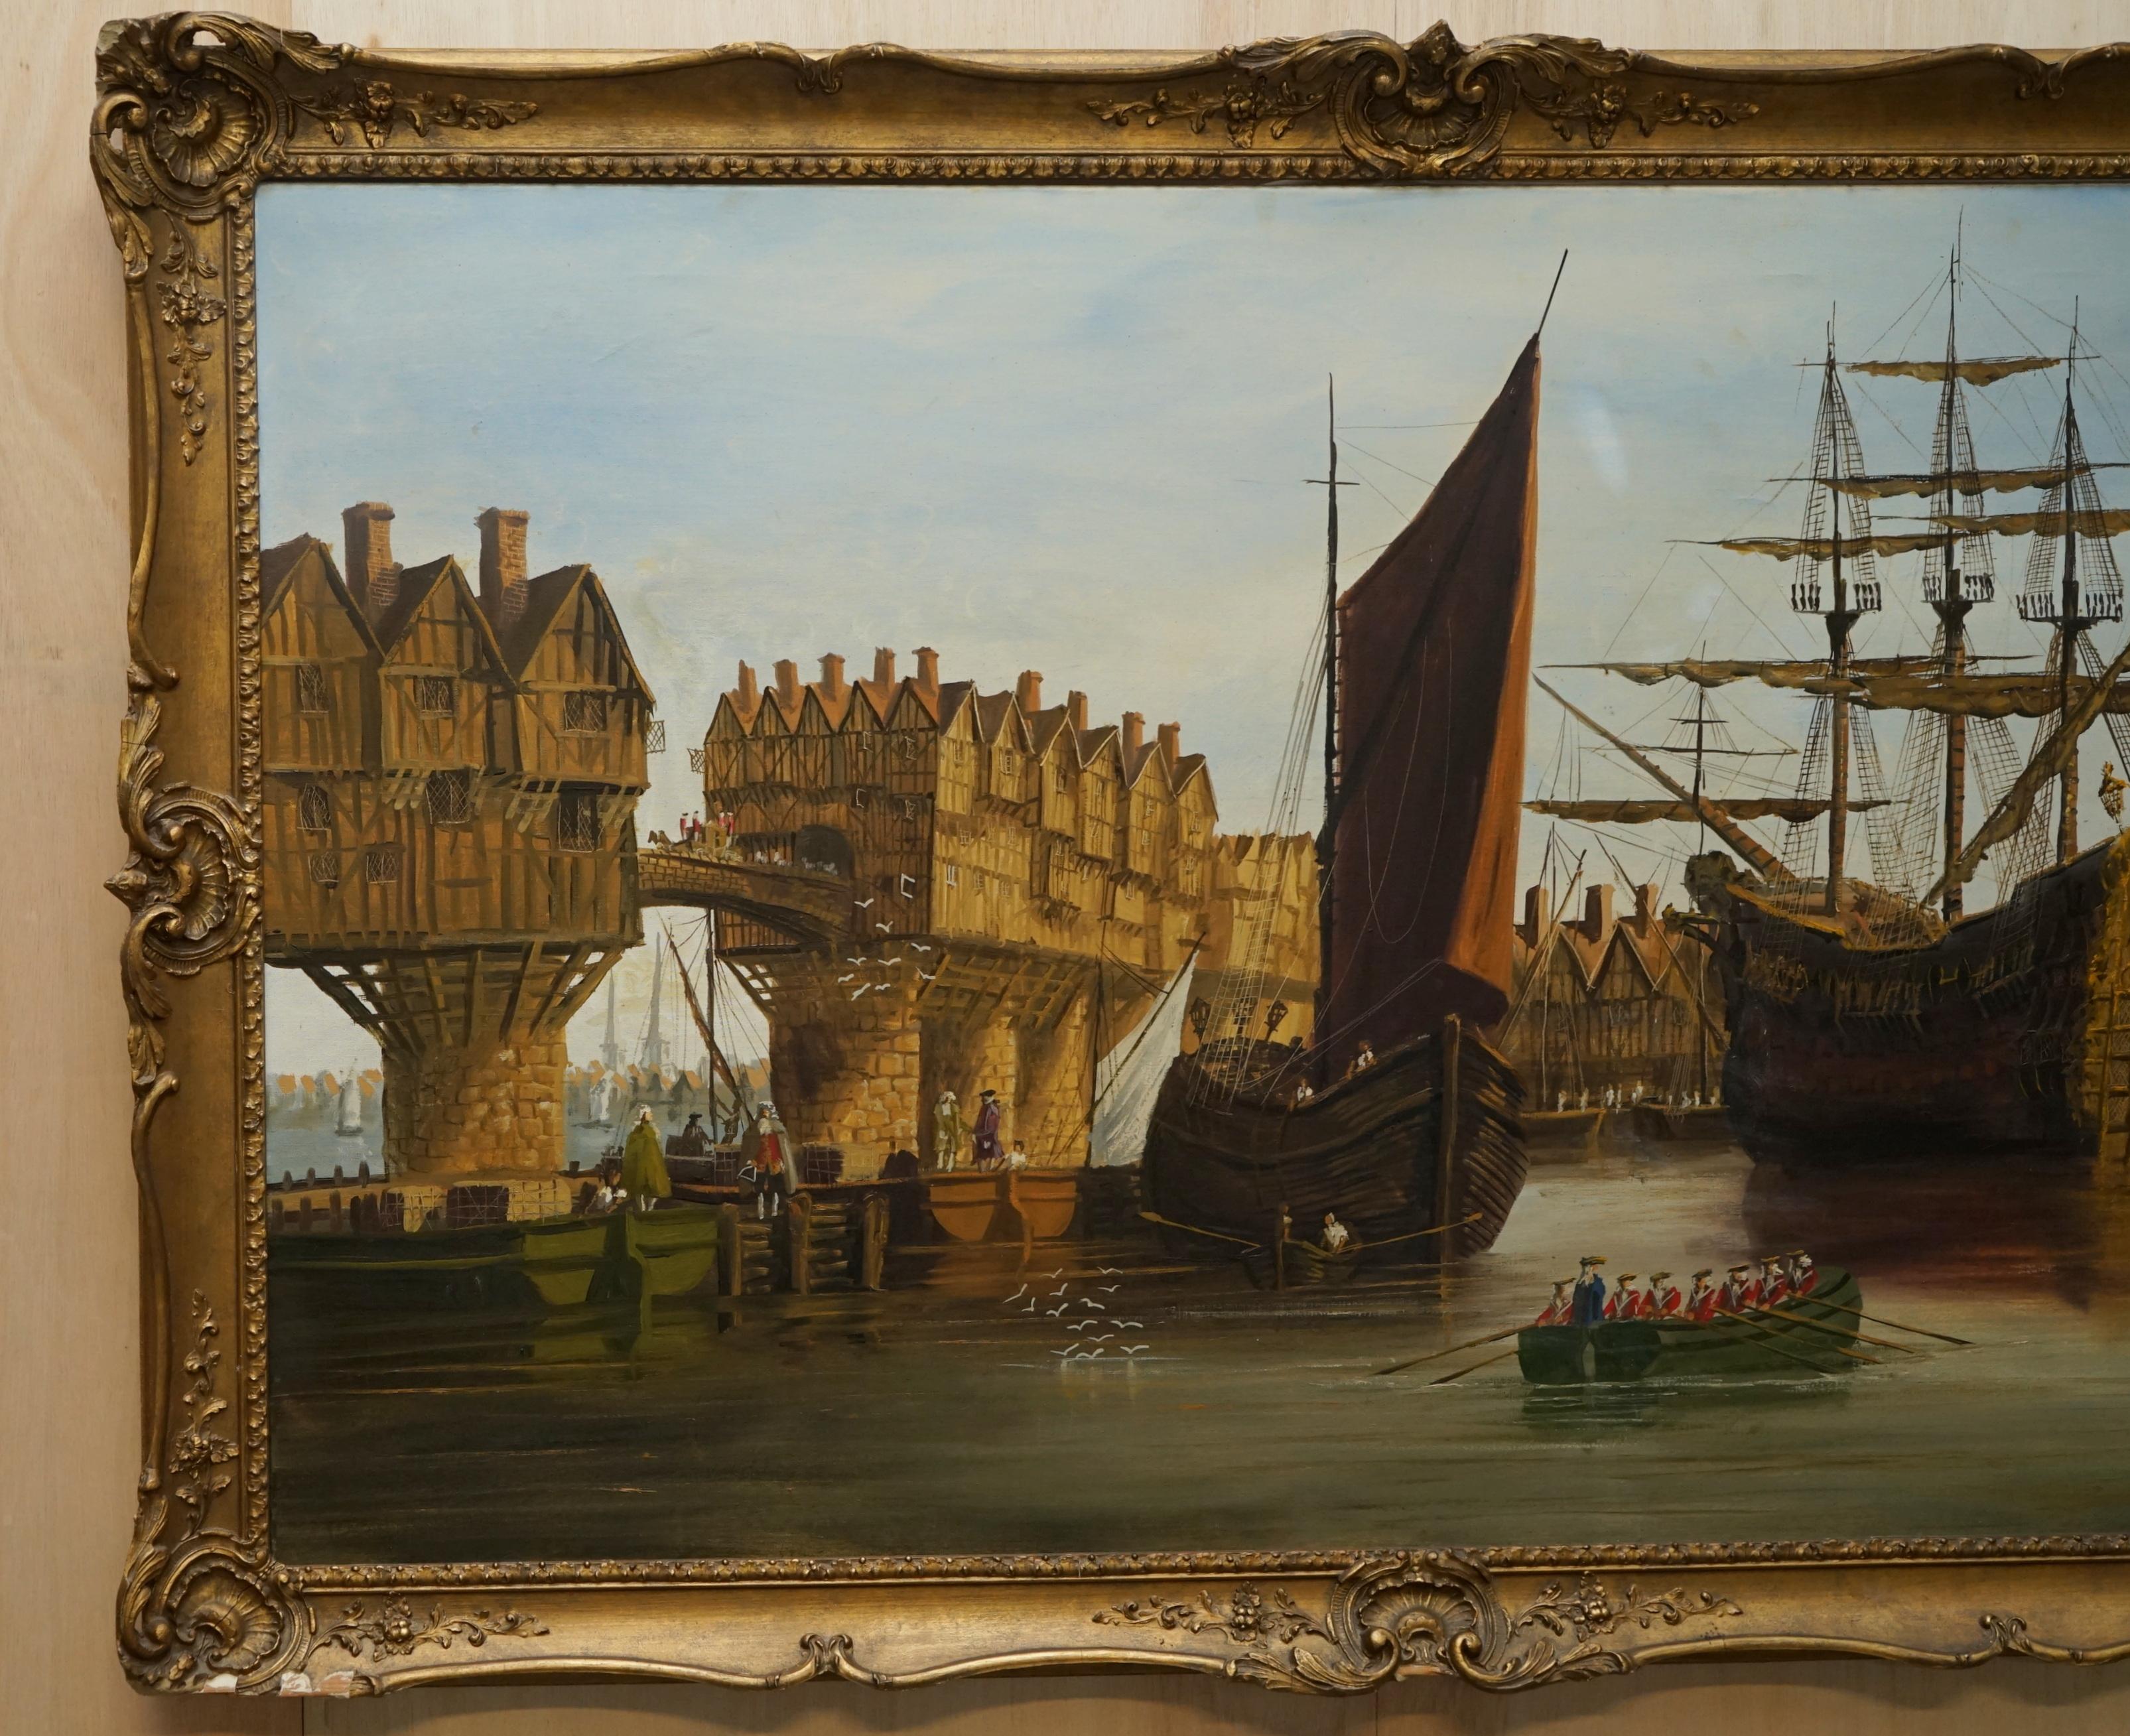 We are delighted to offer for sale this very large and decorative oil on canvas of some early Victorian ships on the Thames.

This is a wonderful painting that looks really quite exquisite in any setting. Due to the size, it can define a wall and